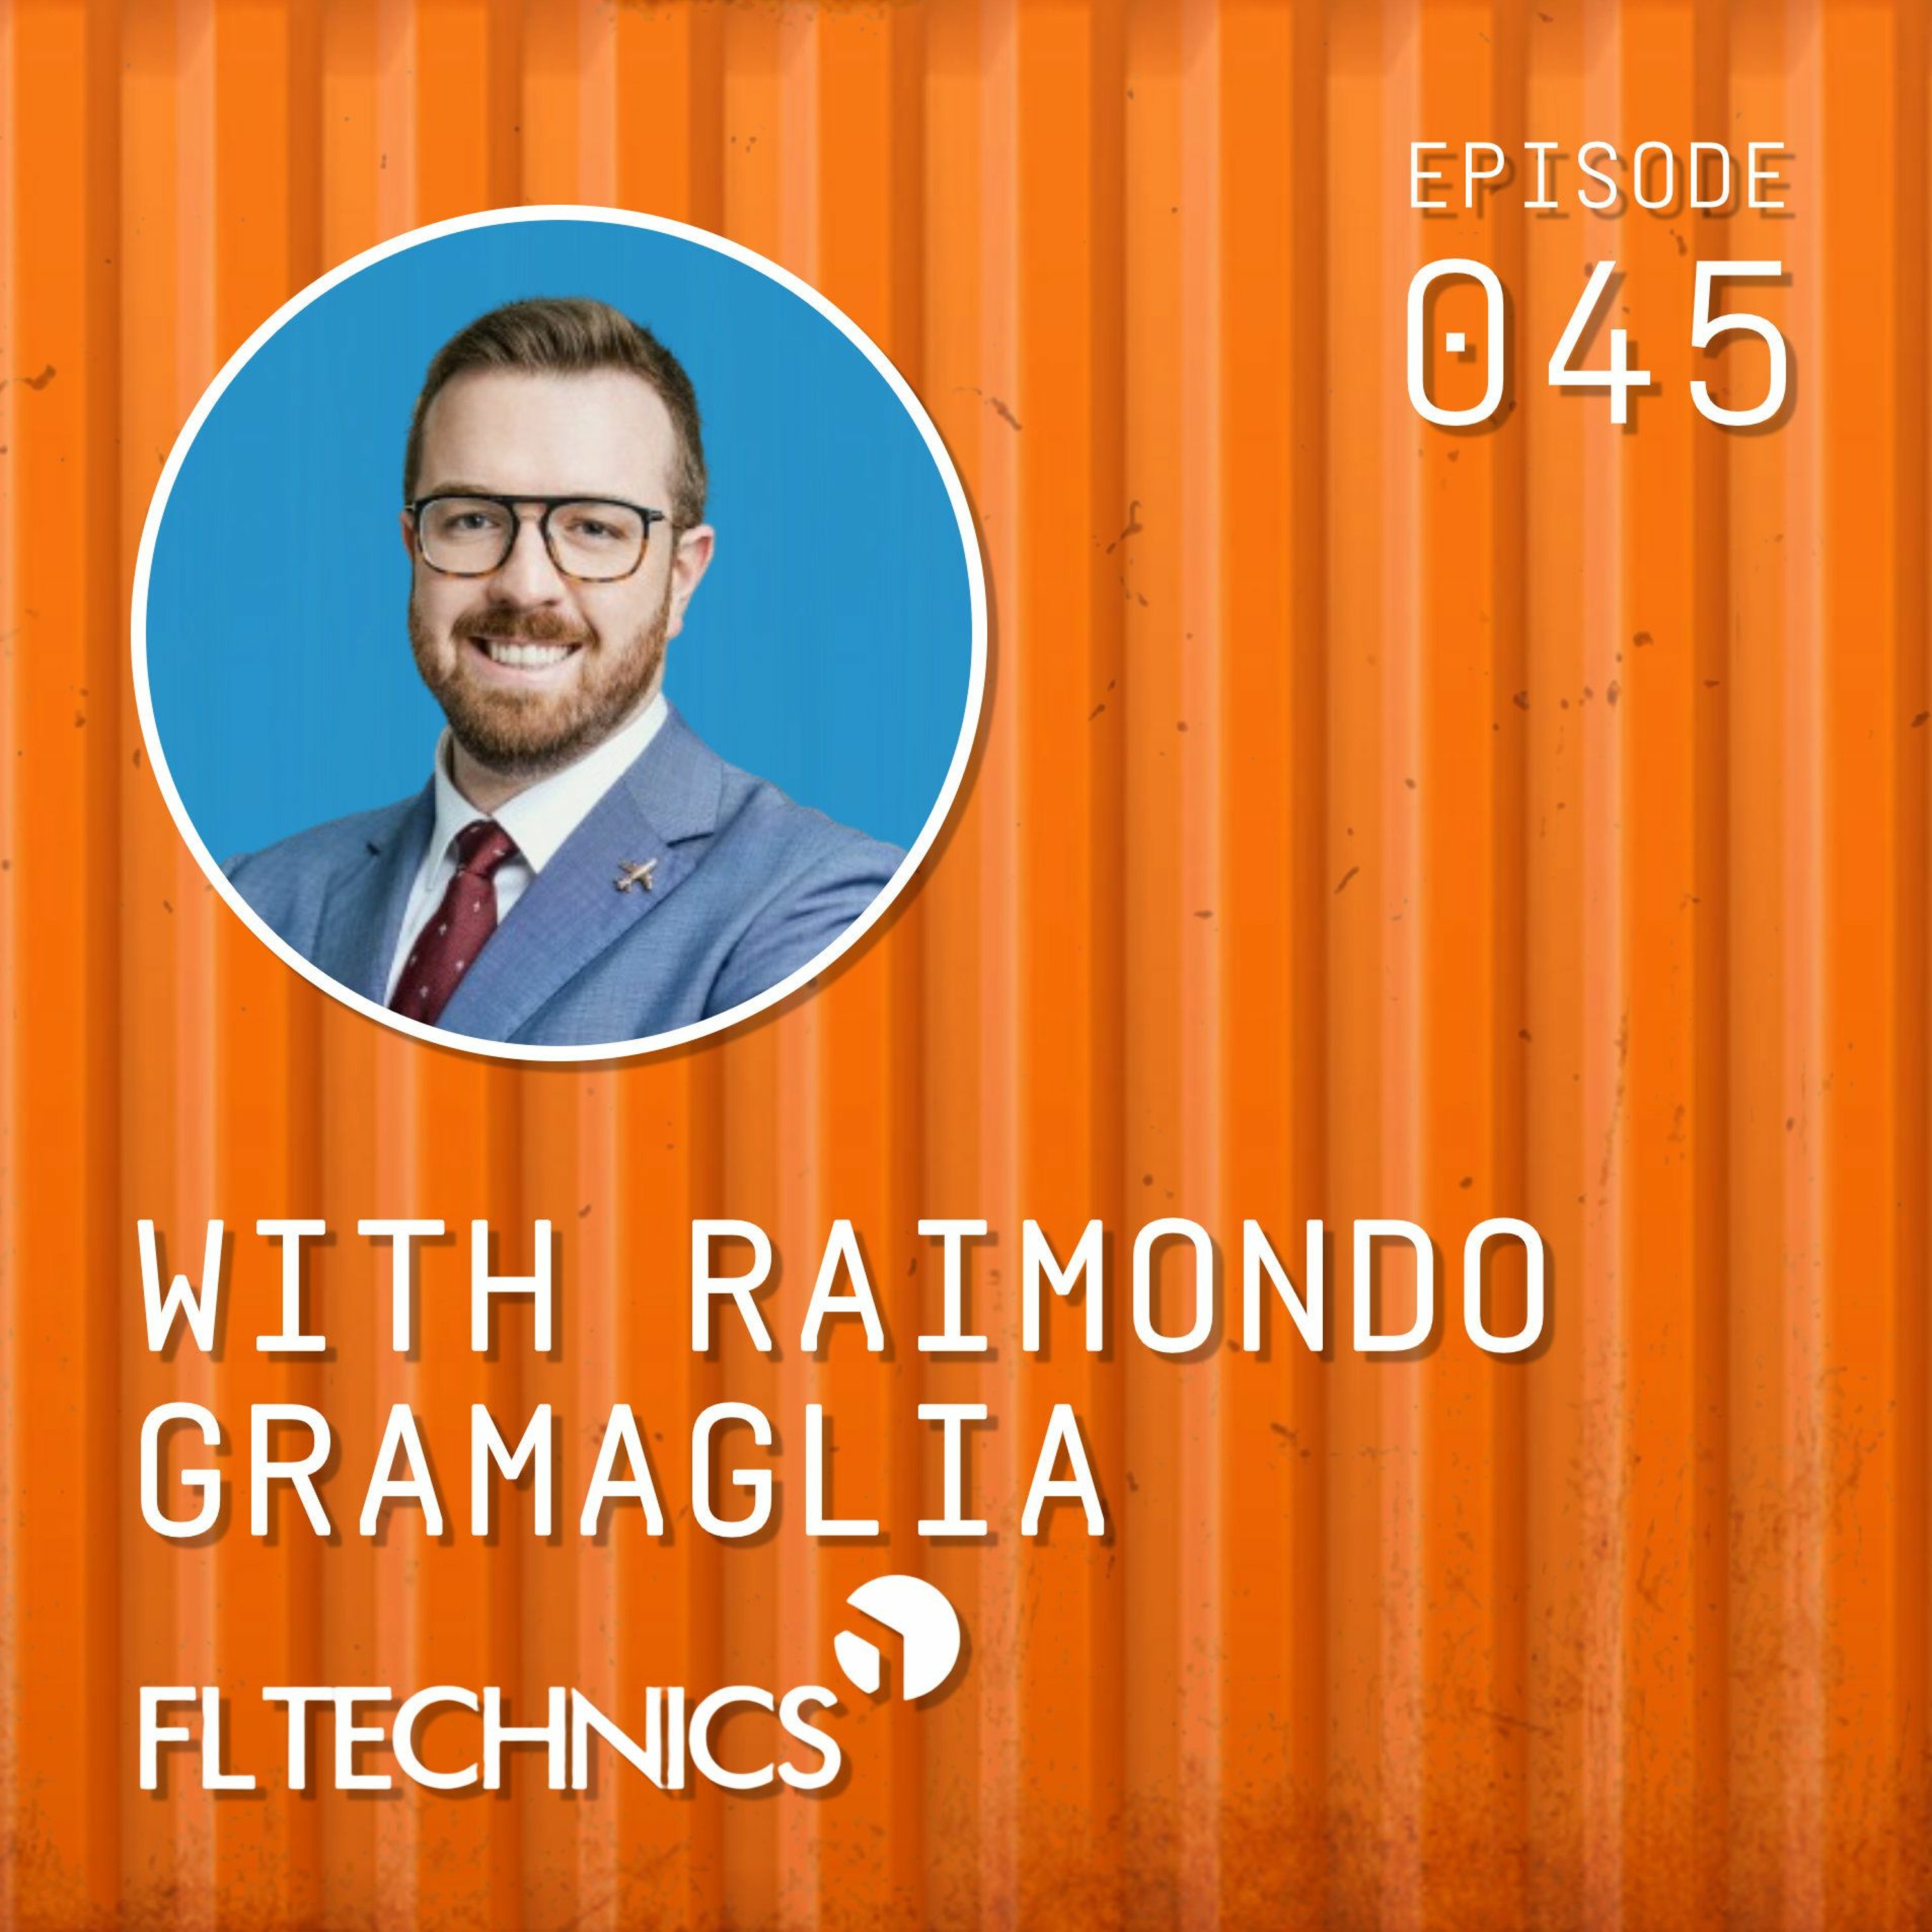 Episode 045 - Marketing And Sales In Logistics  Enabling Growth By Working Together